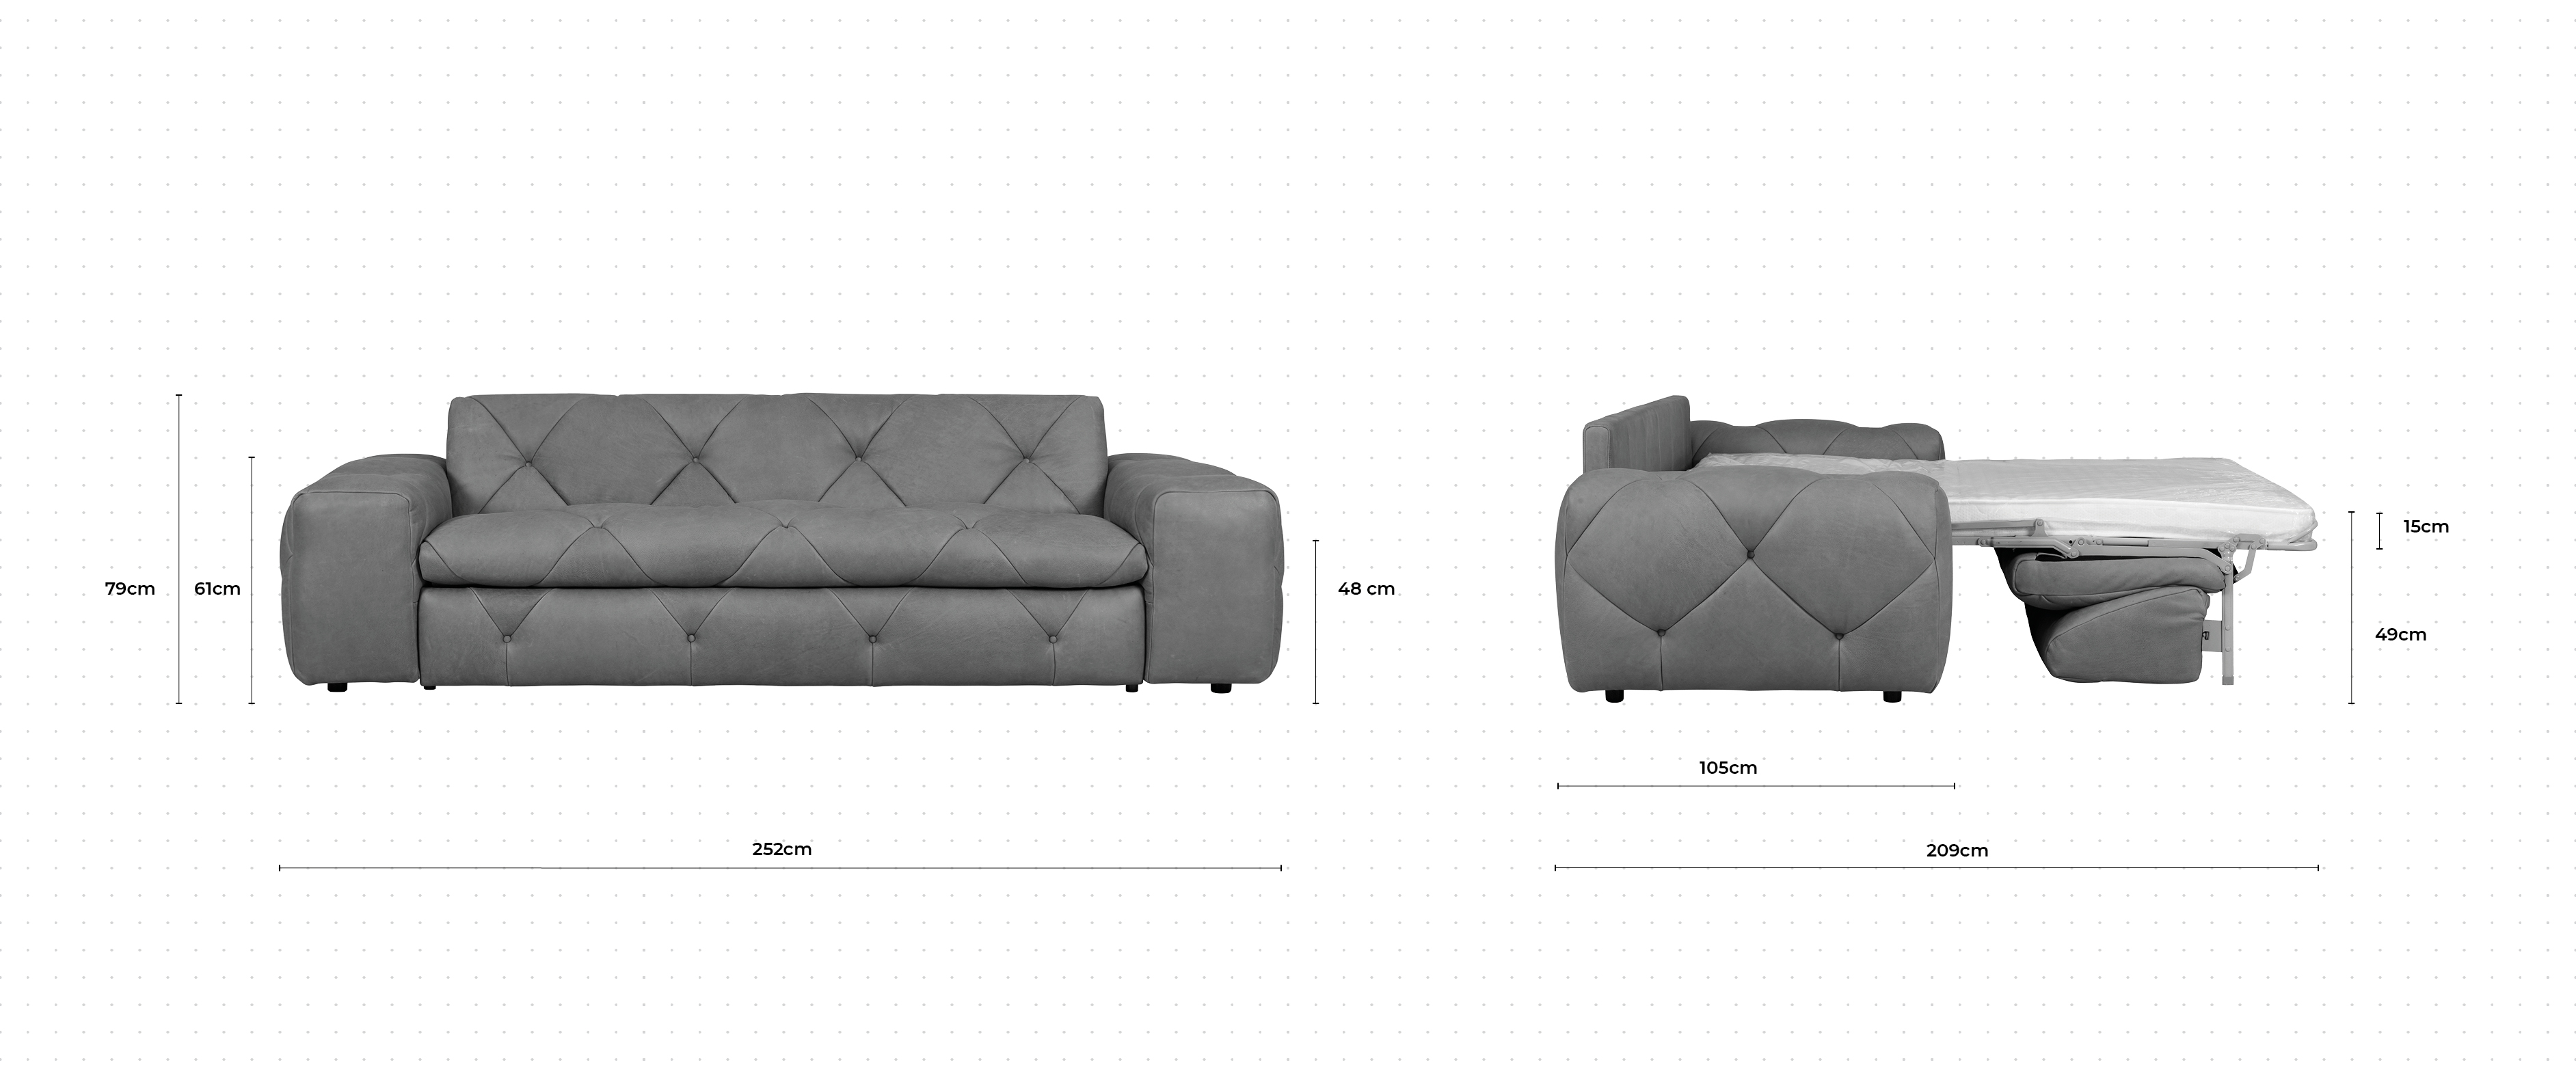 Alfred 3 Seater Sofa Bed dimensions